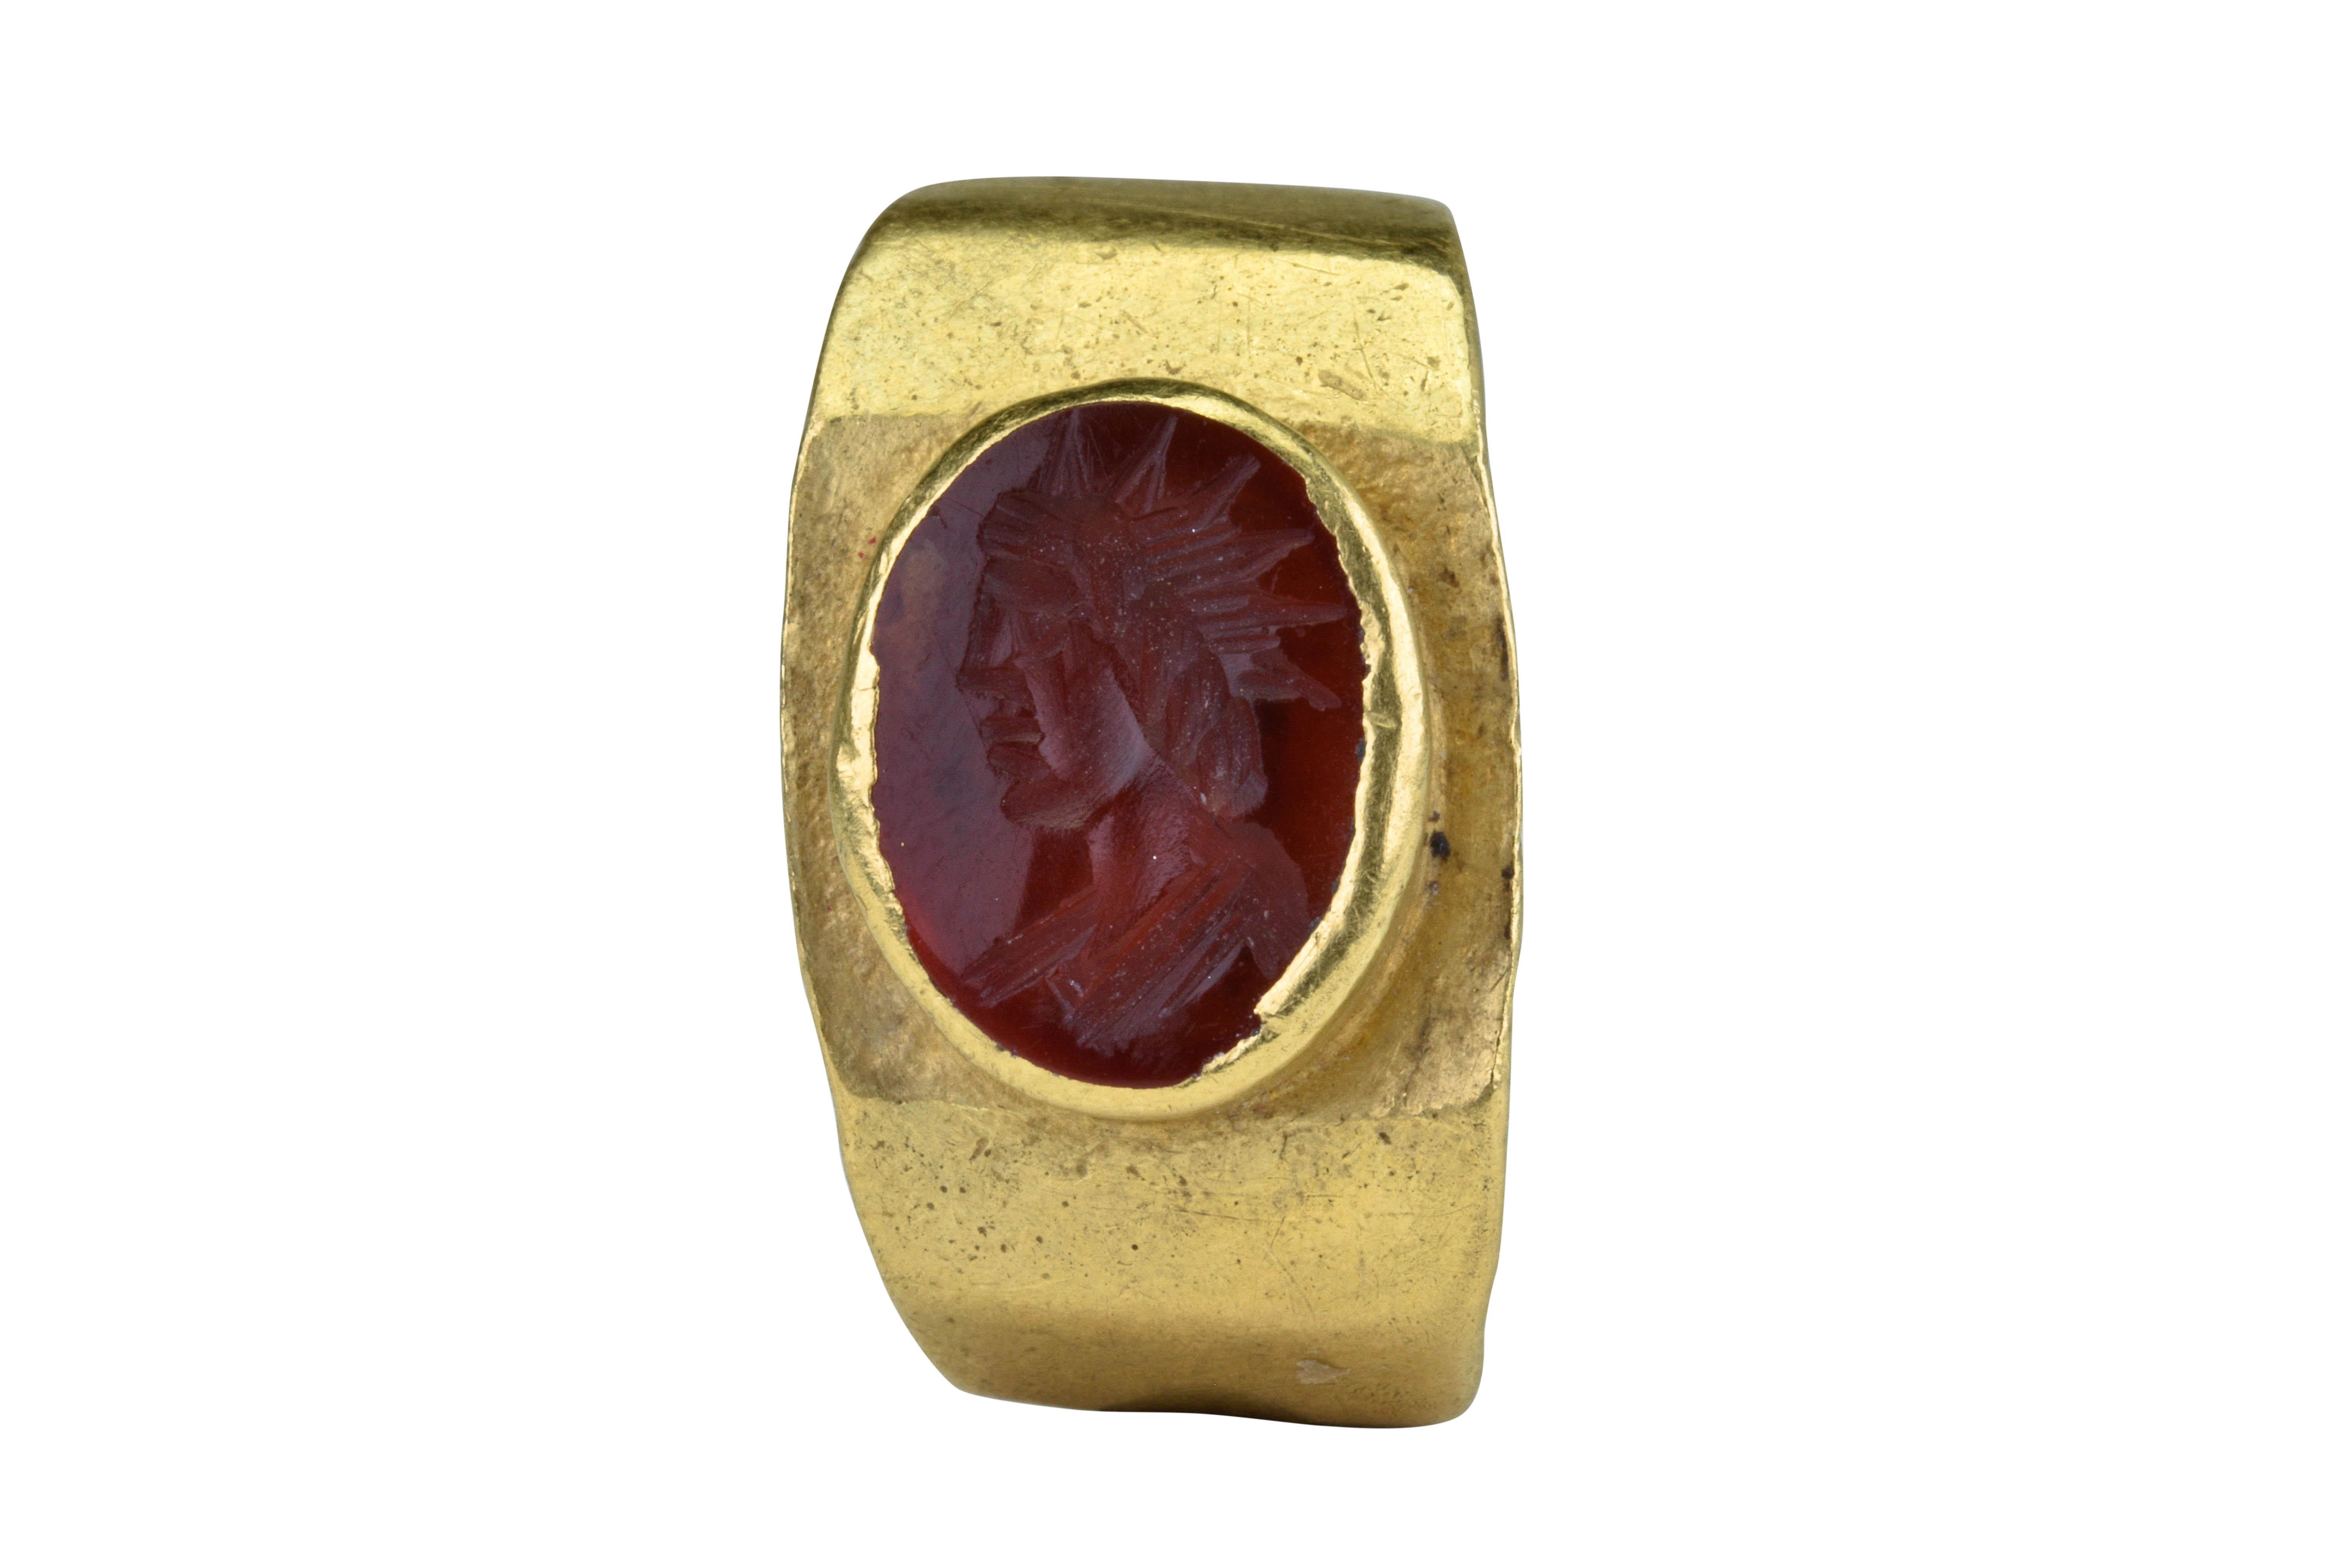 Ancient Roman Gold Intaglio Signet Ring with Sol Invictus

Ca. 200-300 AD

An Ancient Roman gold ring of faceted, flat-section band tapered to the rear. Bezel containing a stone intaglio depicting the bust of Sol Invictus wearing a radiate crown.